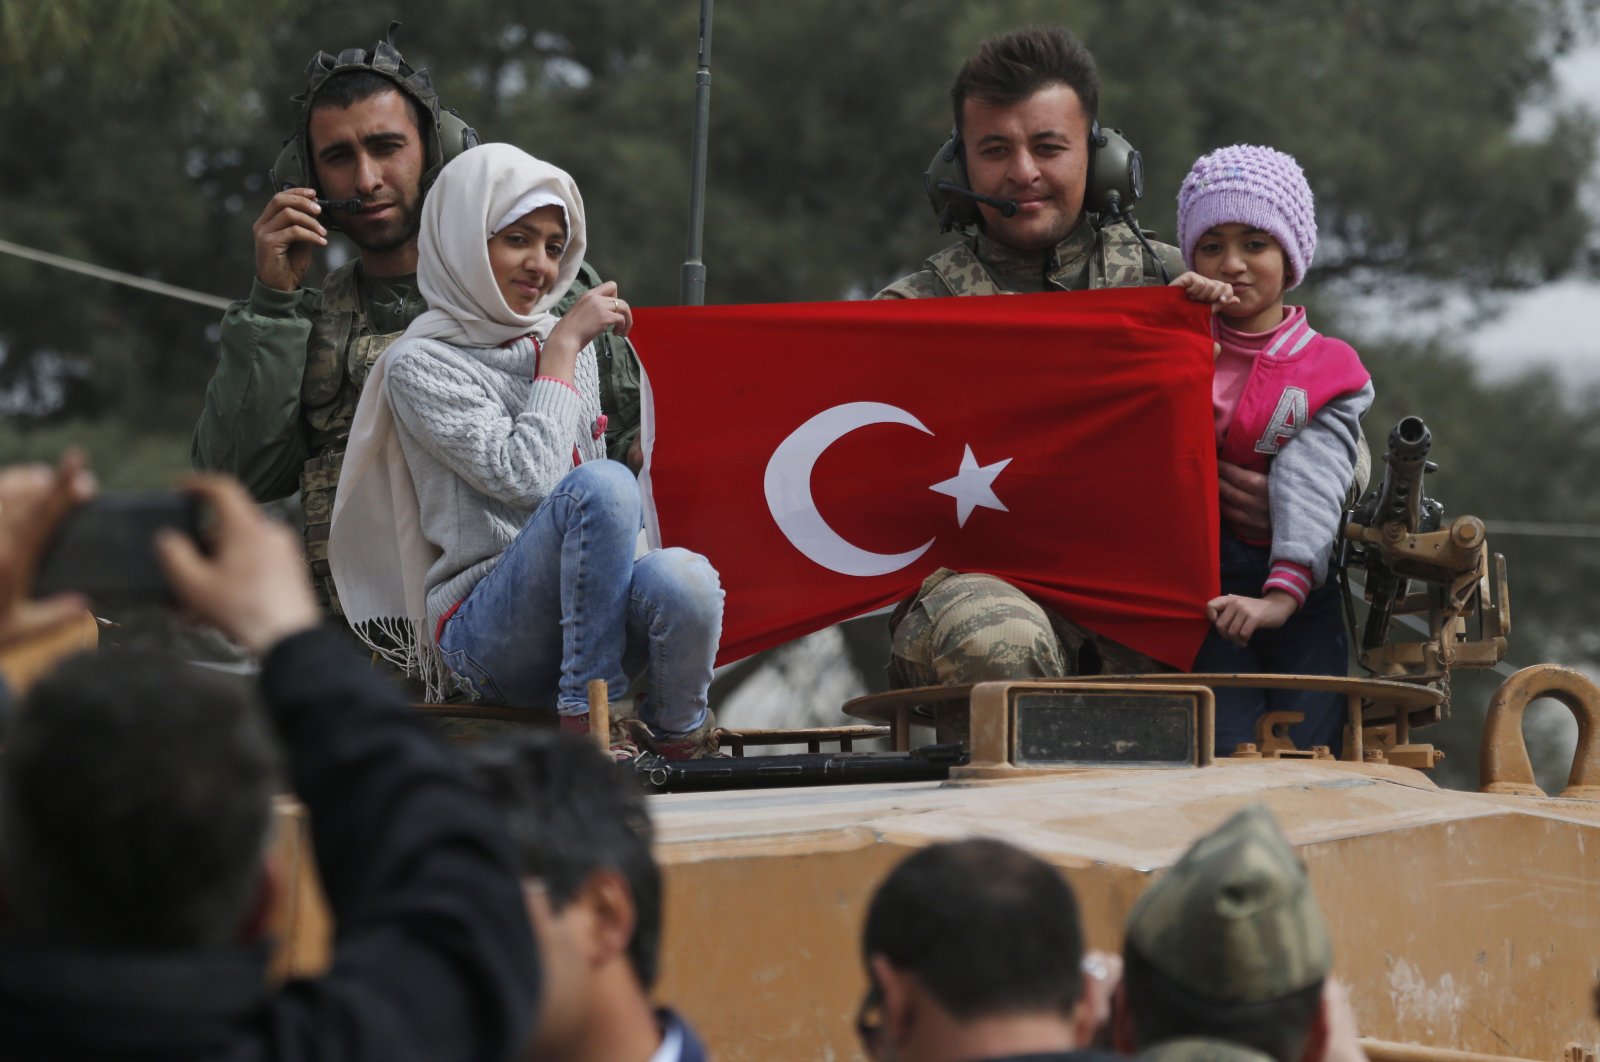 Turkish soldiers atop a tank pose for pictures with Syrian children holding a Turkish flag, during a Turkish government-organized media tour, in the northwestern city of Afrin, Syria. (AP Photo)